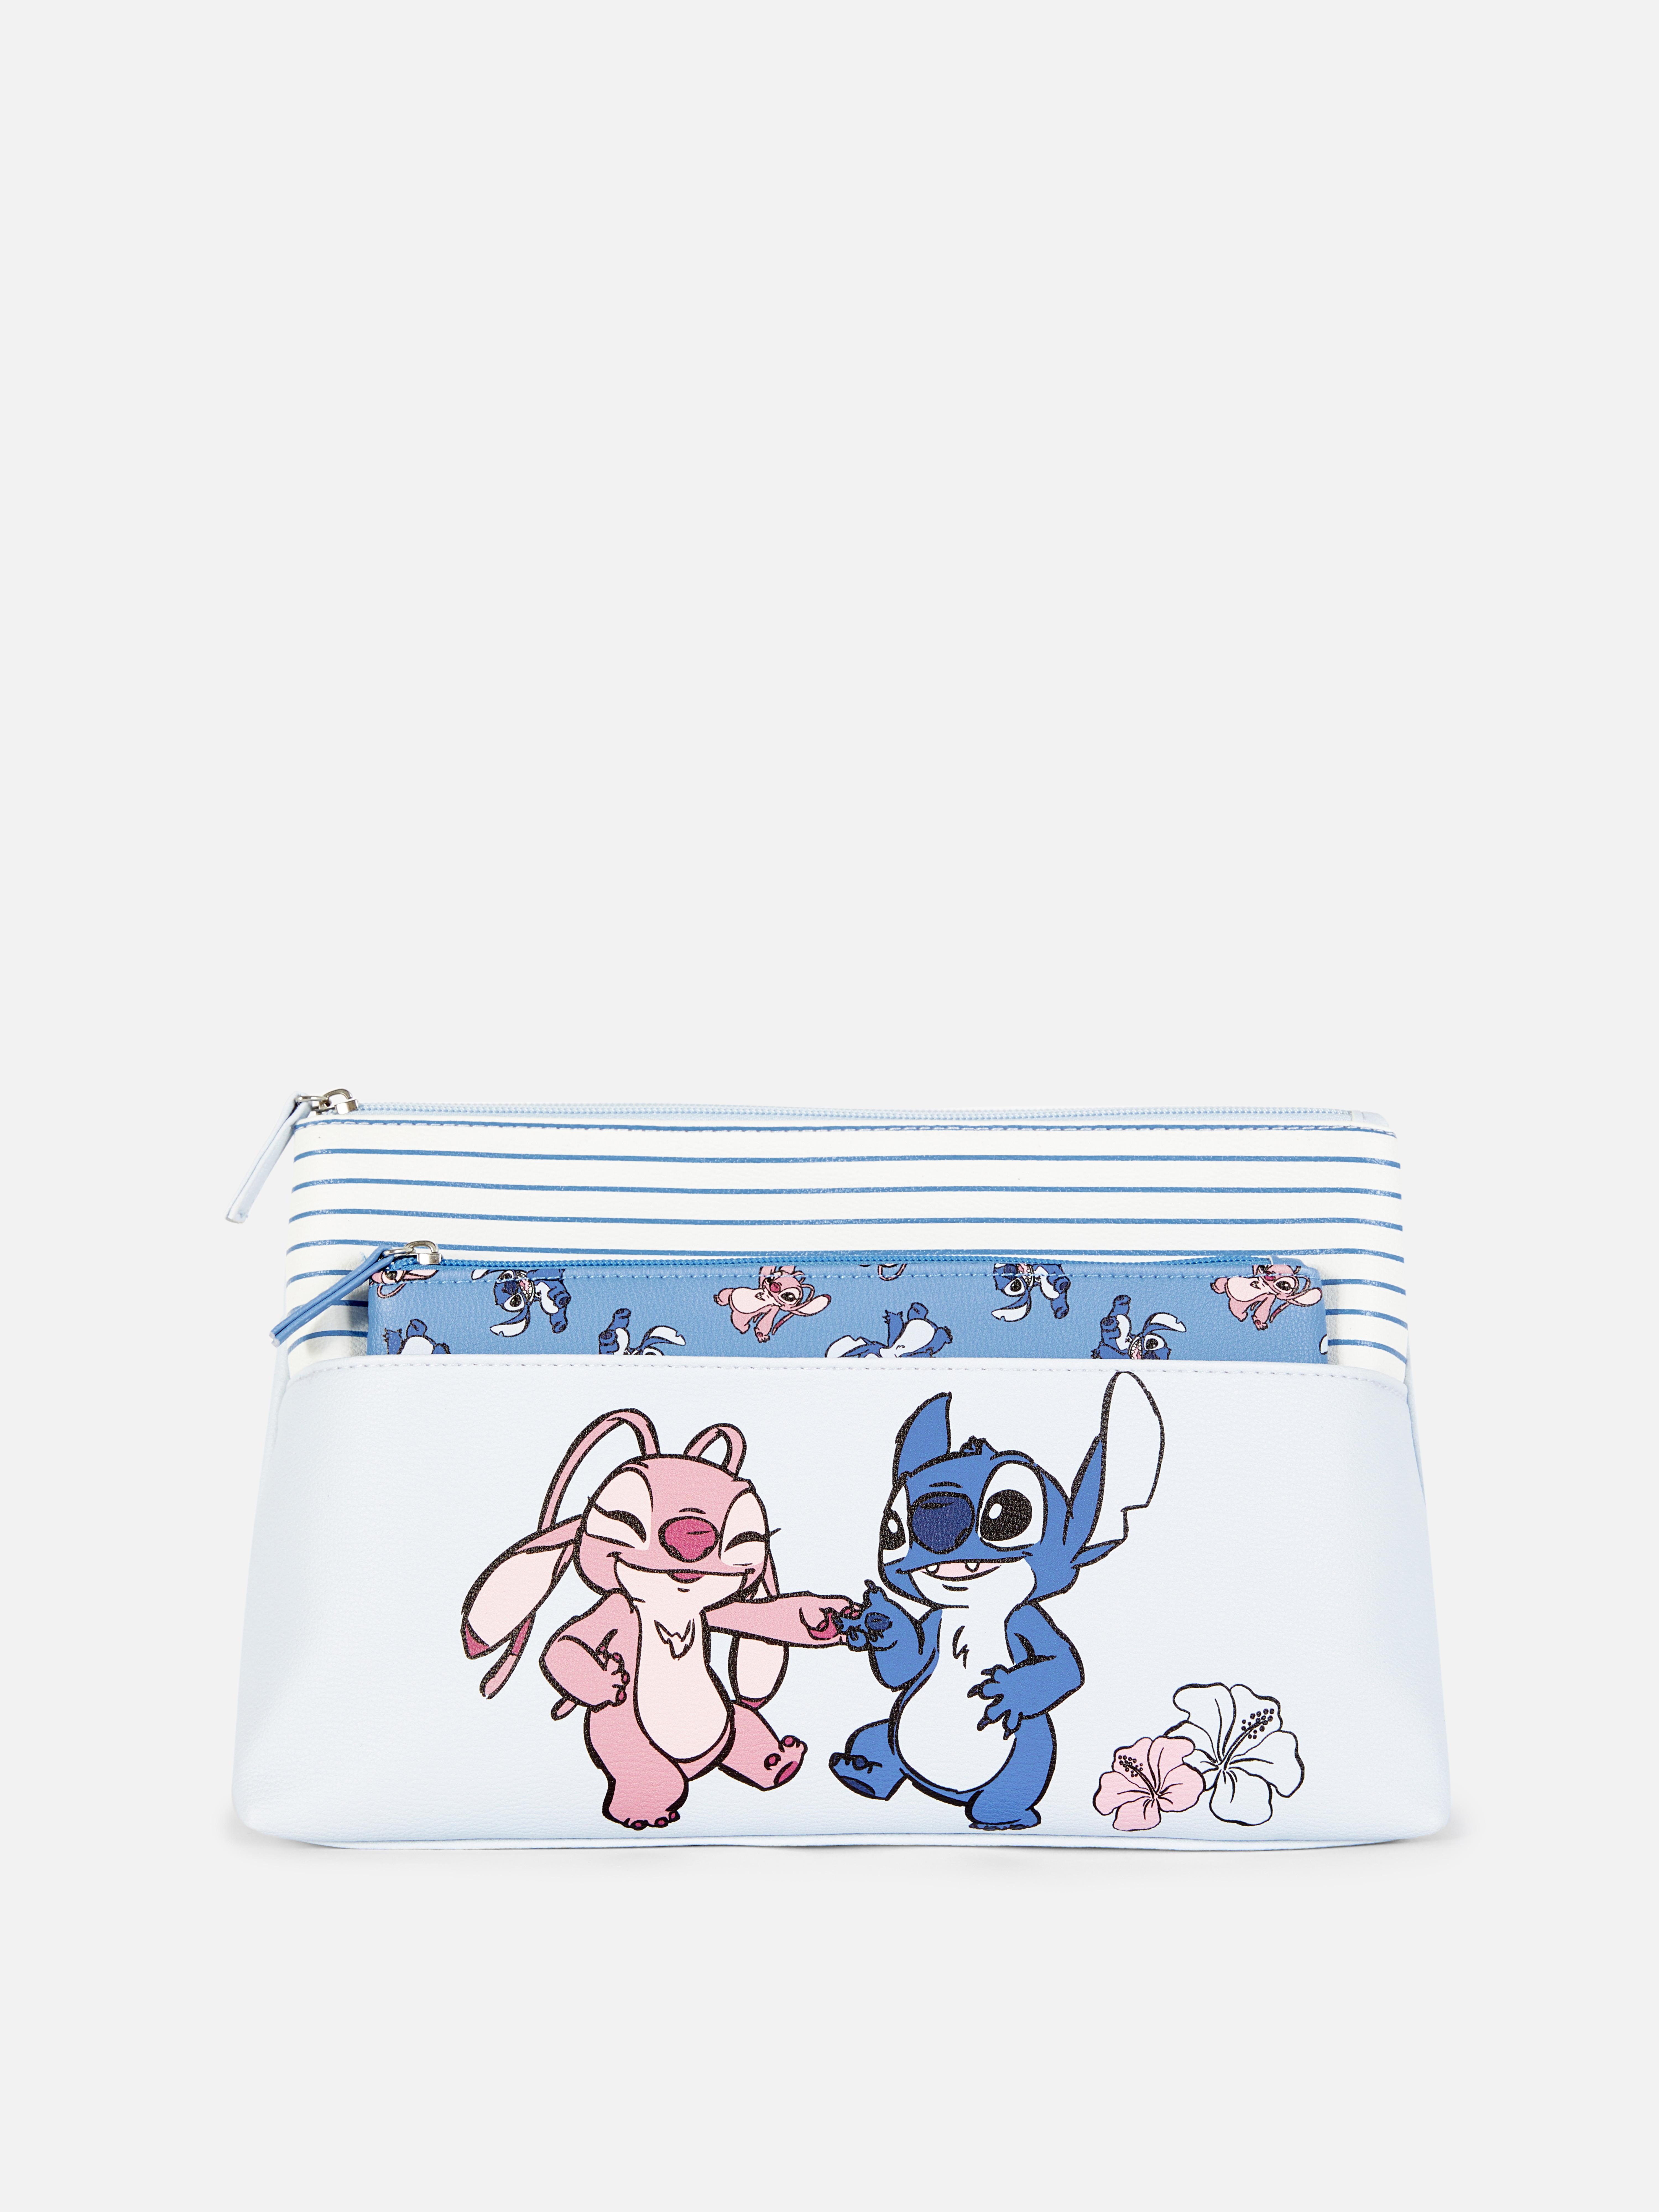 Disney's Lilo & Stitch Two-in-One Makeup Bag Set